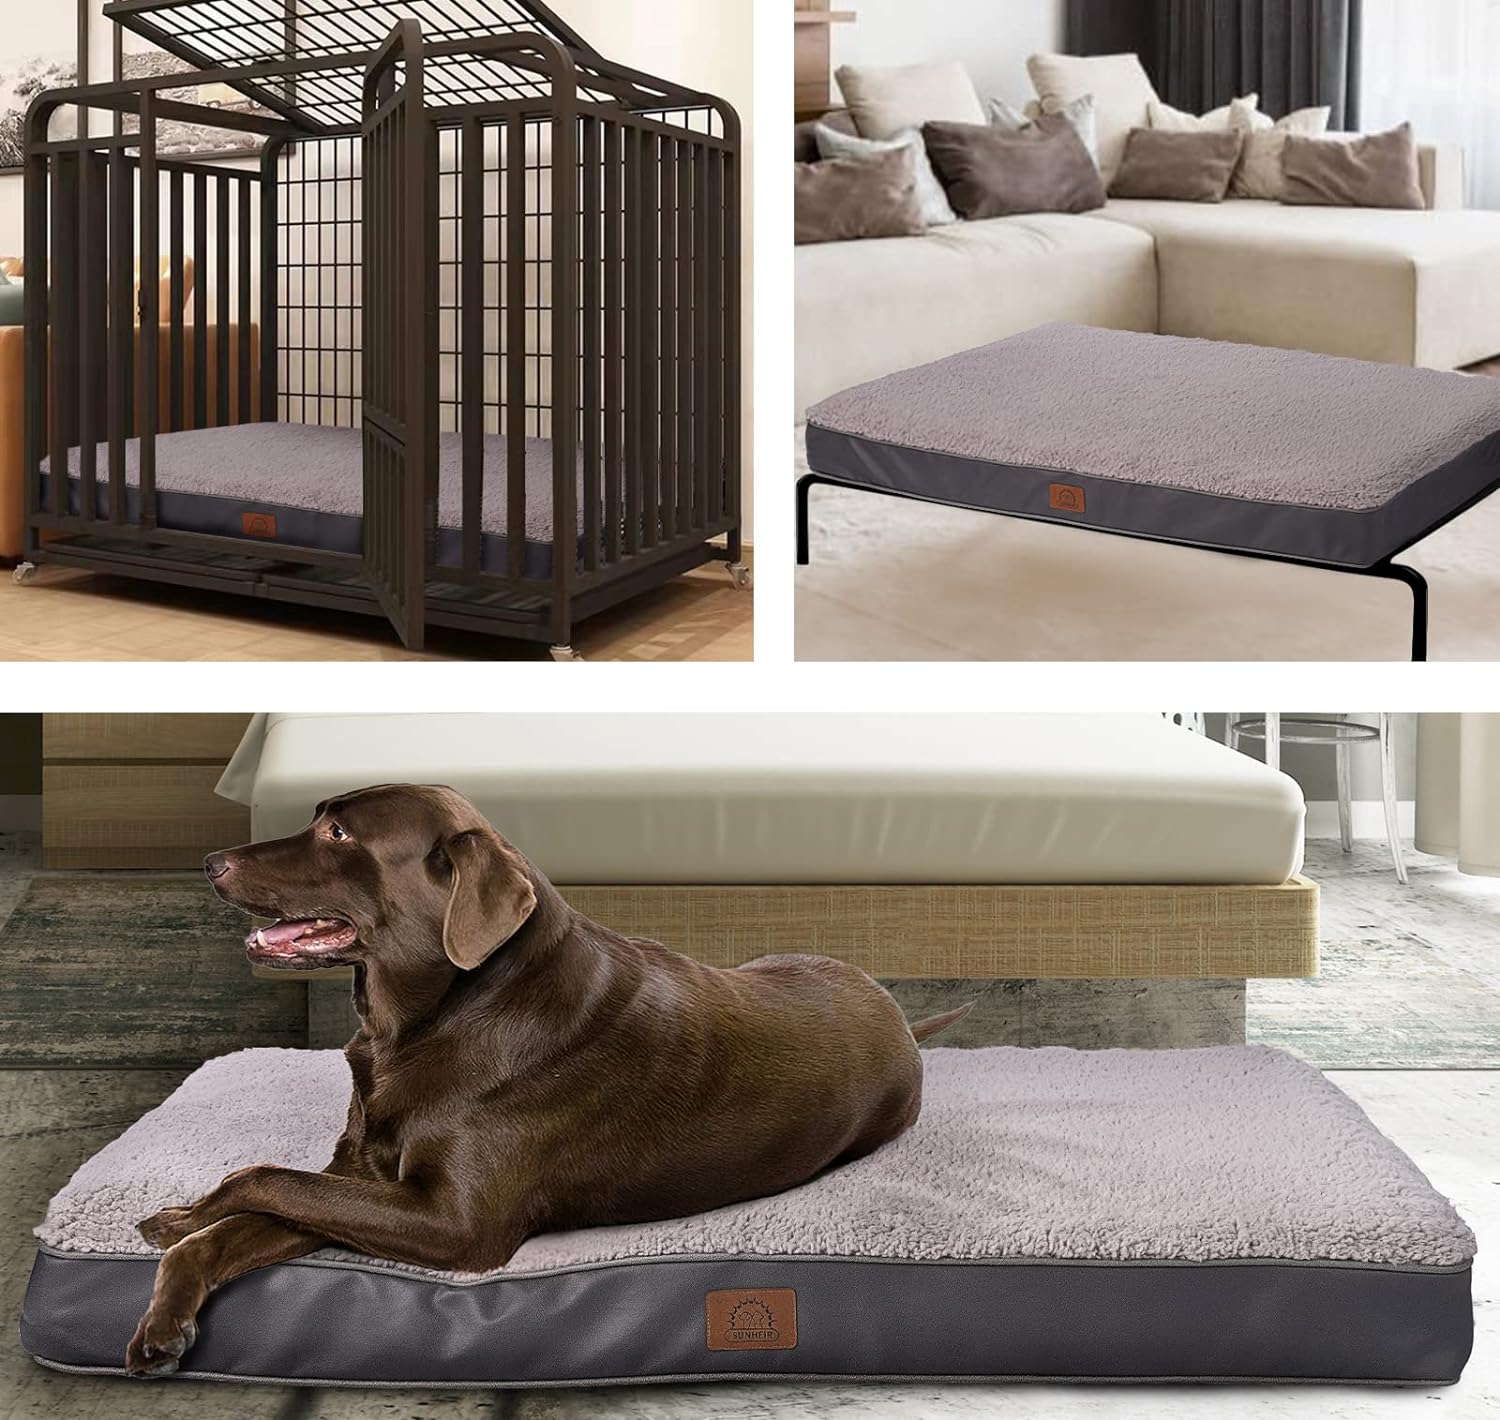 Sunheir Orthopedic Dog Bed for Large Dogs and Extra Large Dogs, Large Dog Bed with Removable Waterproof Cover and Machine Washable Dog Bed, Pet Bed Mat Egg-Crate Foam, L(35X22X3), Grey